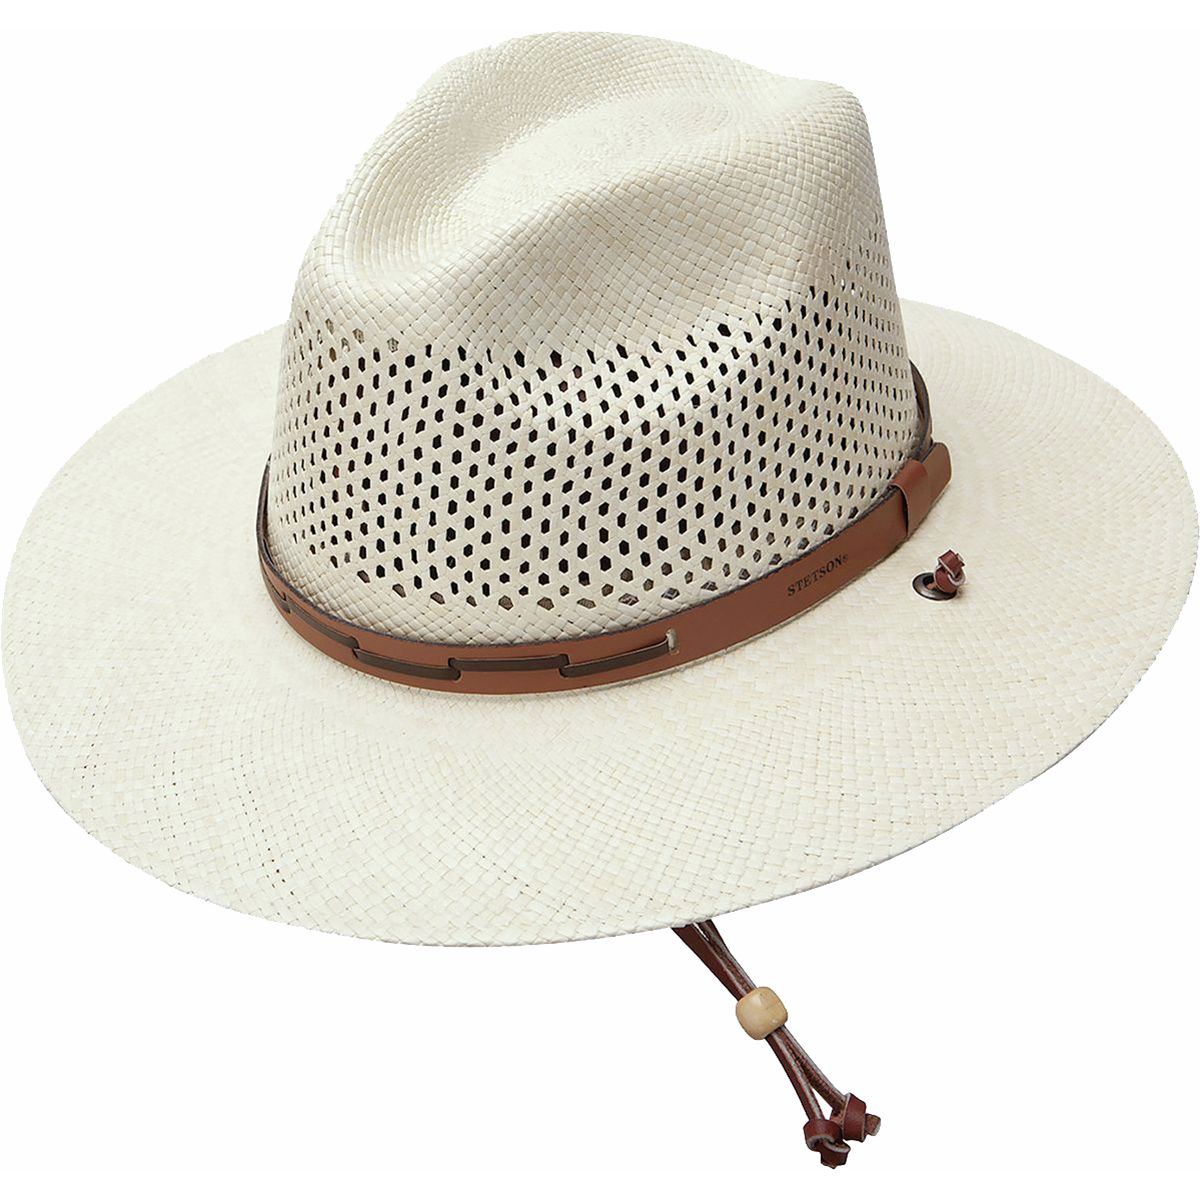 Панама-сафари airway Stetson, цвет natural